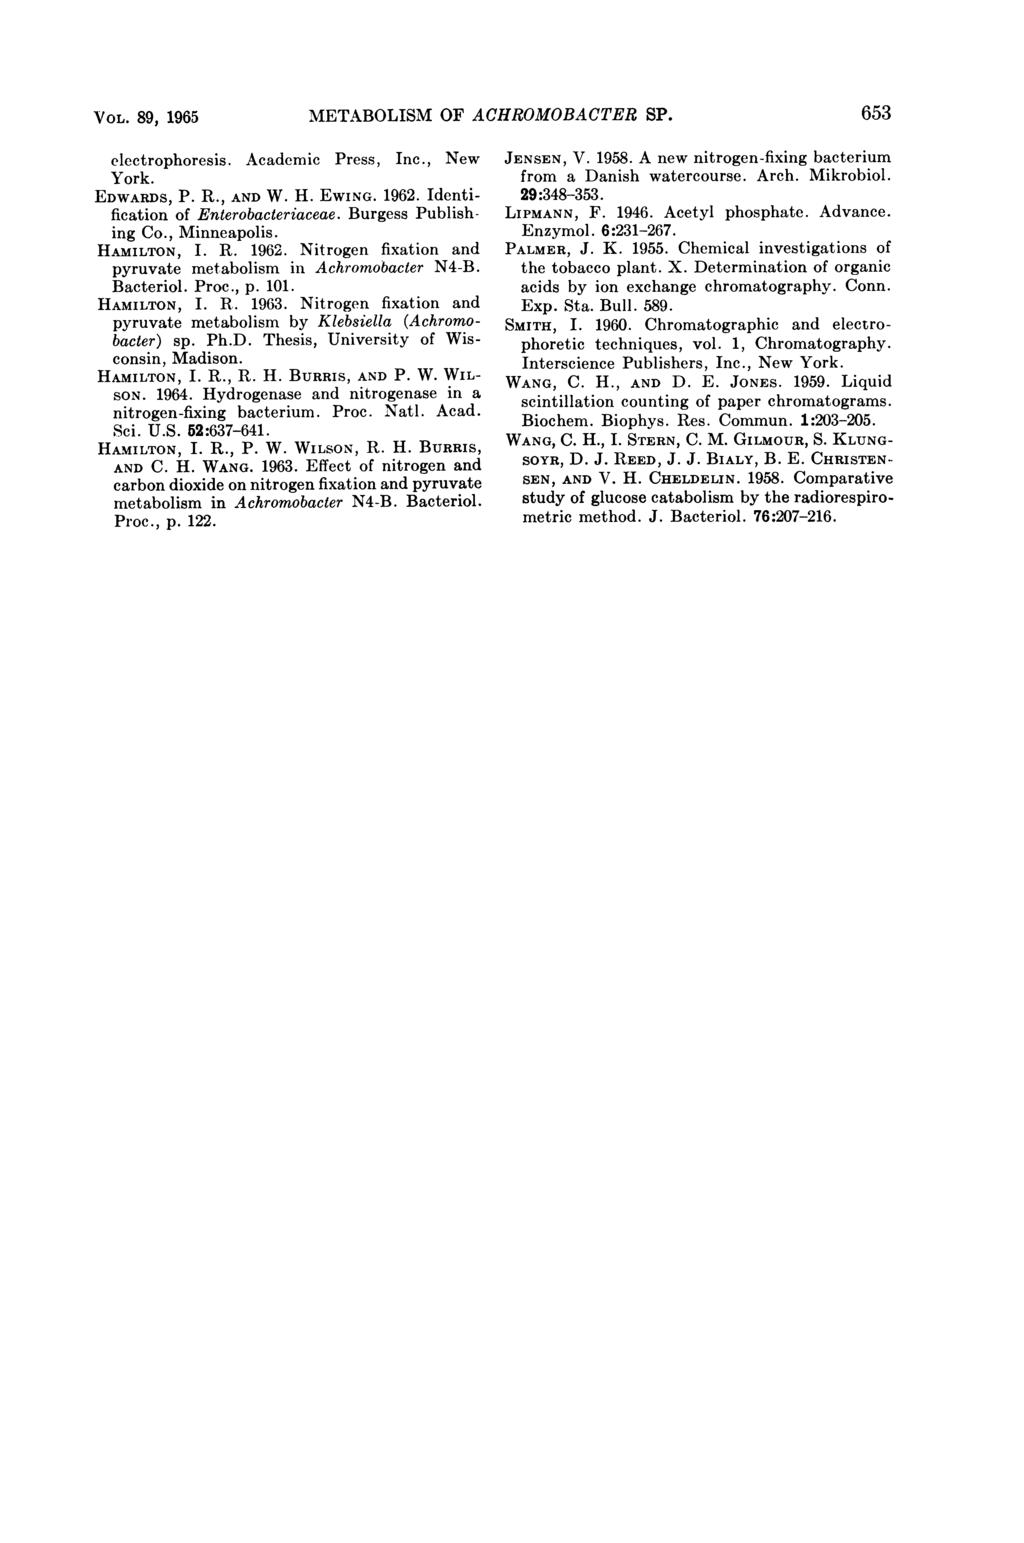 VOL. 89, 1965 METABOLISM OF AC] EfROMOBACTER SP. 653 electrophoresis. Academic Press, Inc., New York. EDWARDS, P. R., AND W. H. EWING. 1962. Identification of Enterobacteriaceae.